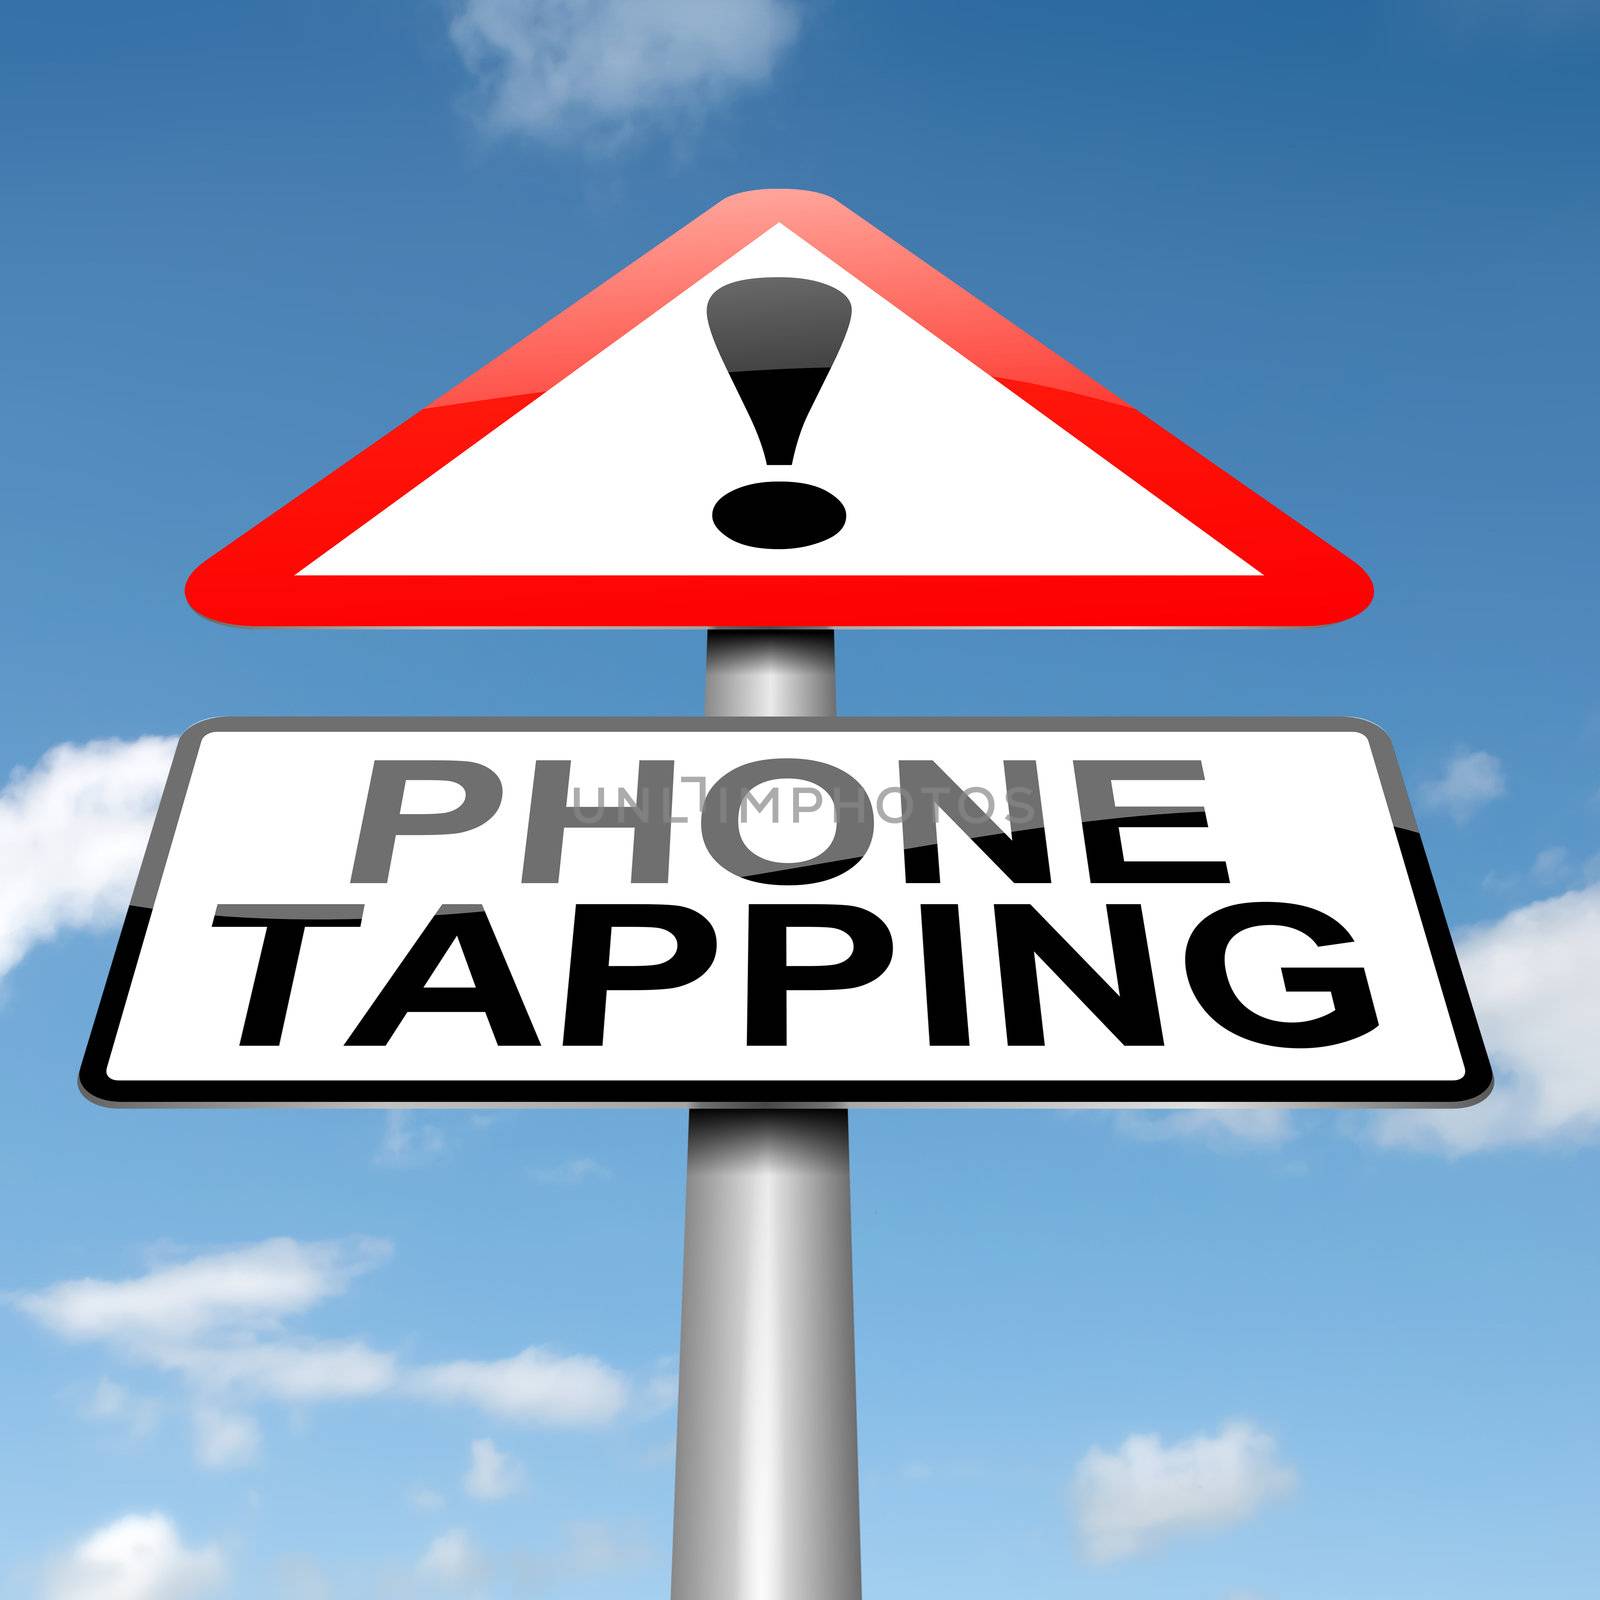 Phone tapping warning sign. by 72soul